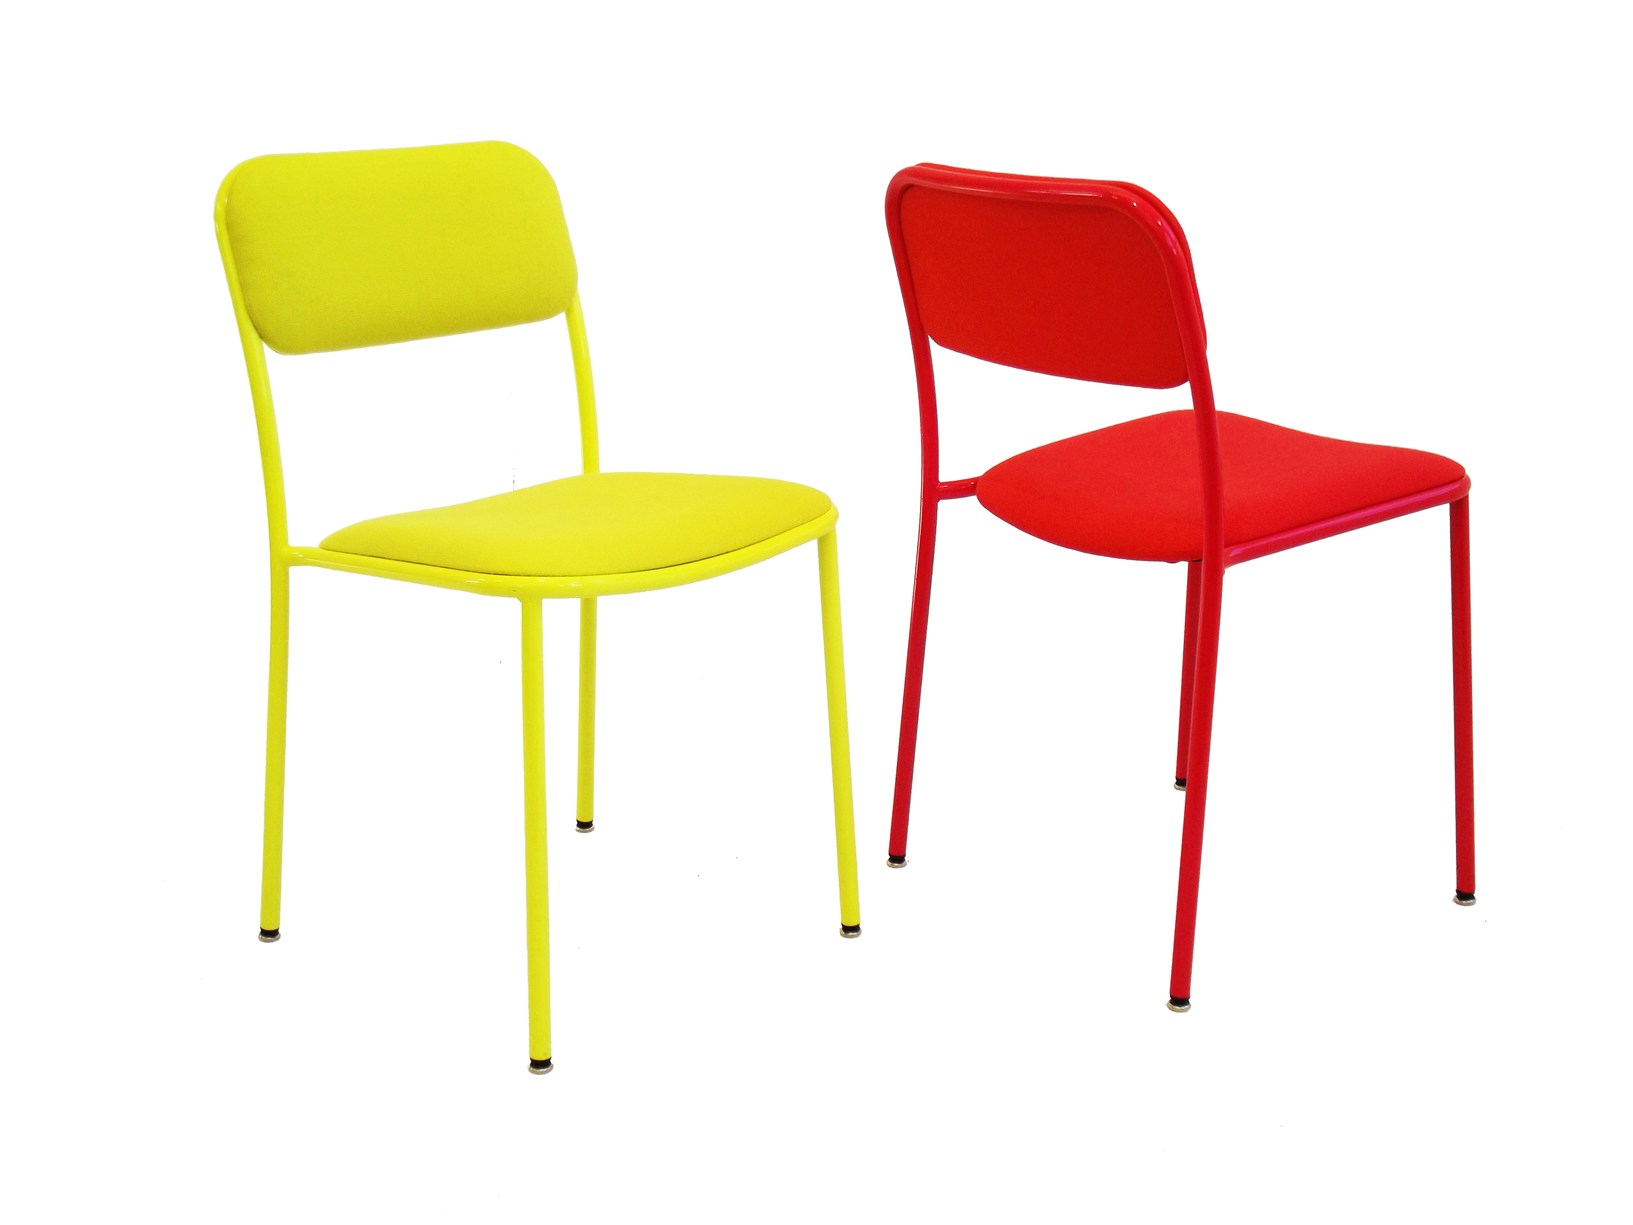 Verso Chairs by Tomoko Azumi for Mark Product